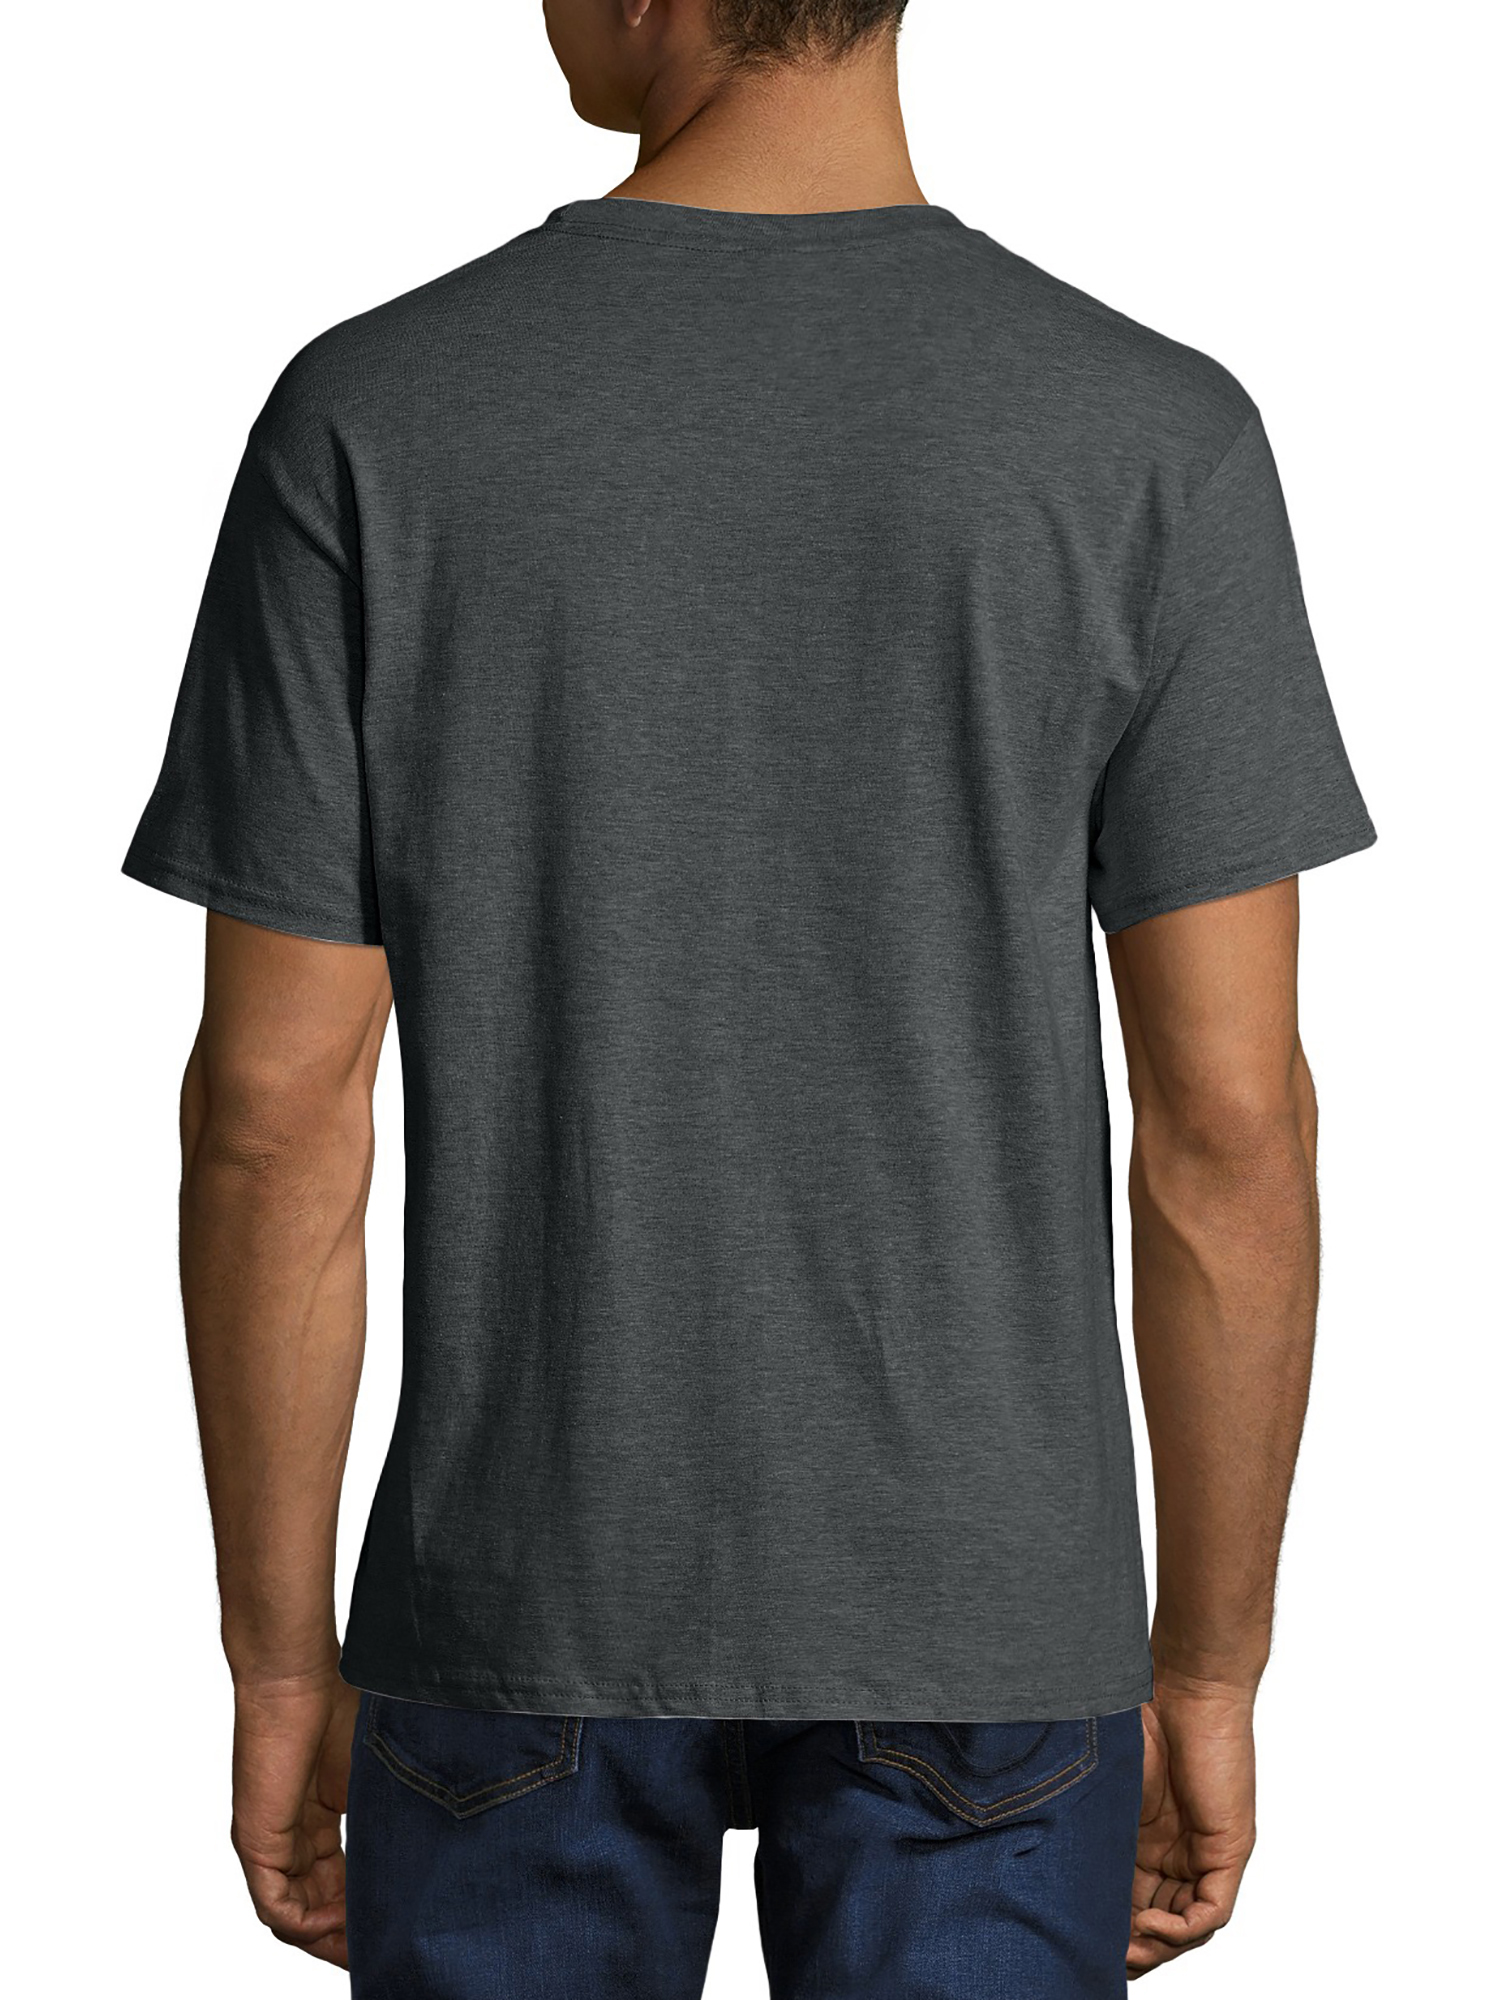 Hanes Men's and Big Men's Beefy-T Crew Neck Short Sleeve T-Shirt, Up To 6XL - image 2 of 7